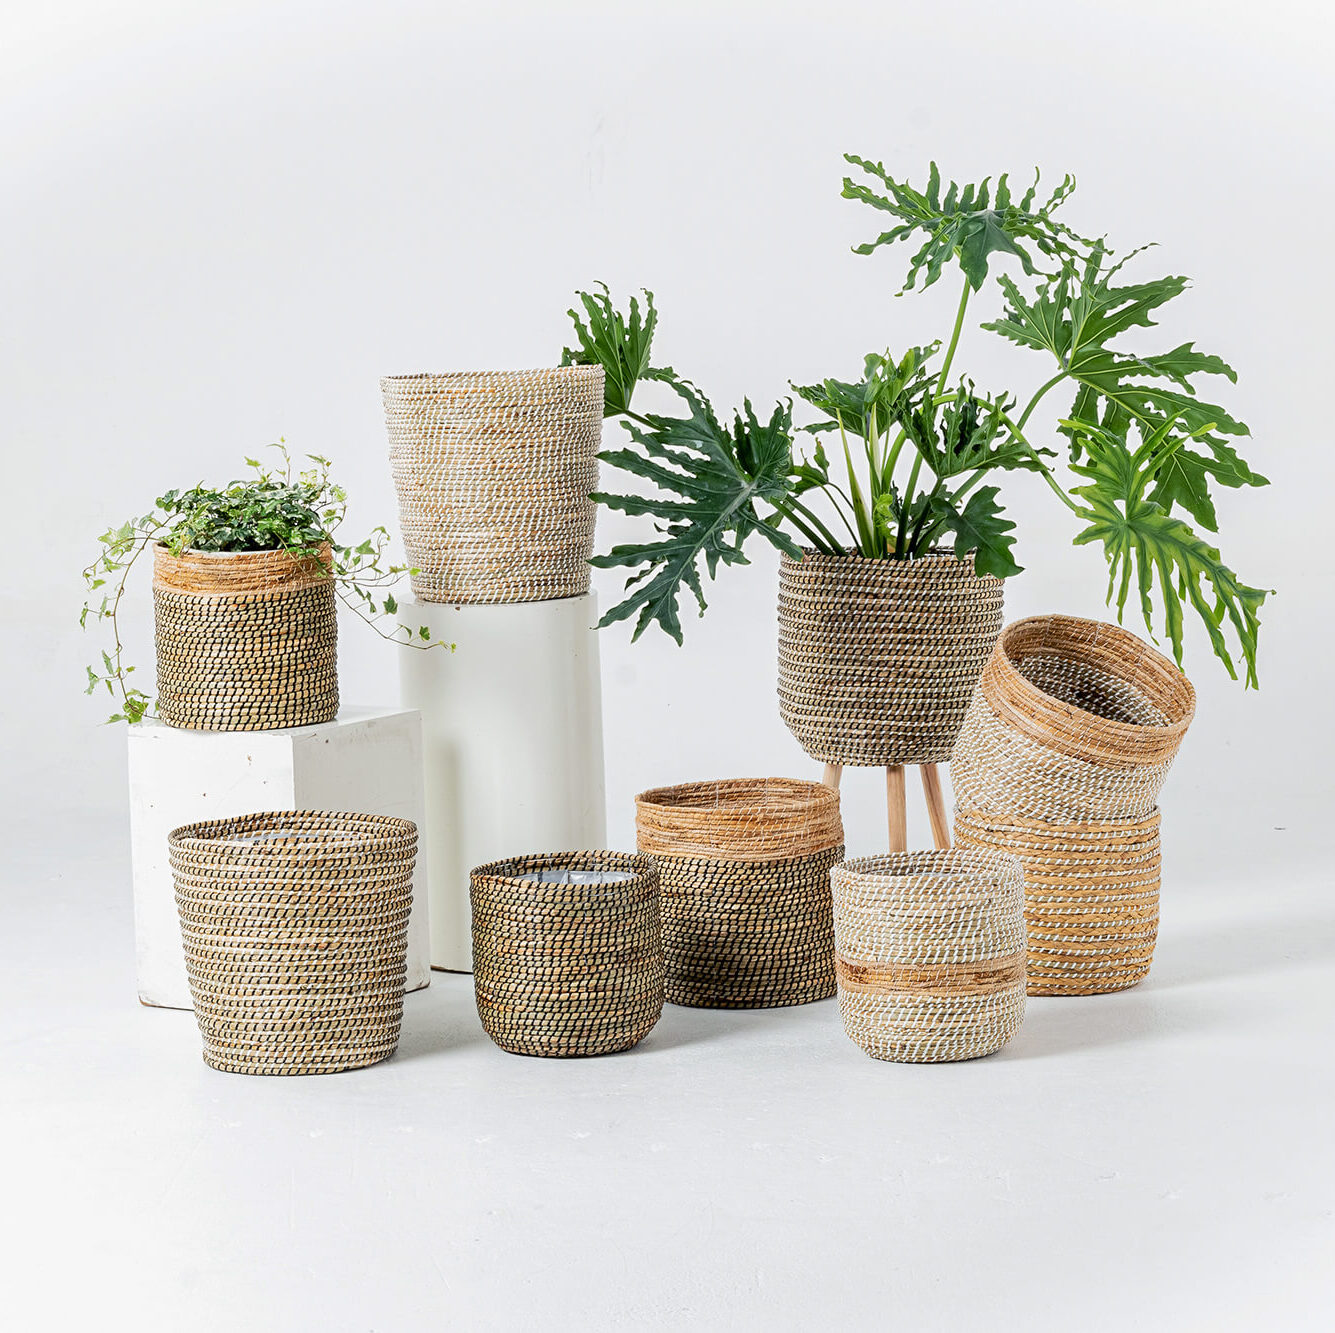 Minimal Woven Seagrass Baskets Planter Wholesale Made in Vietnam